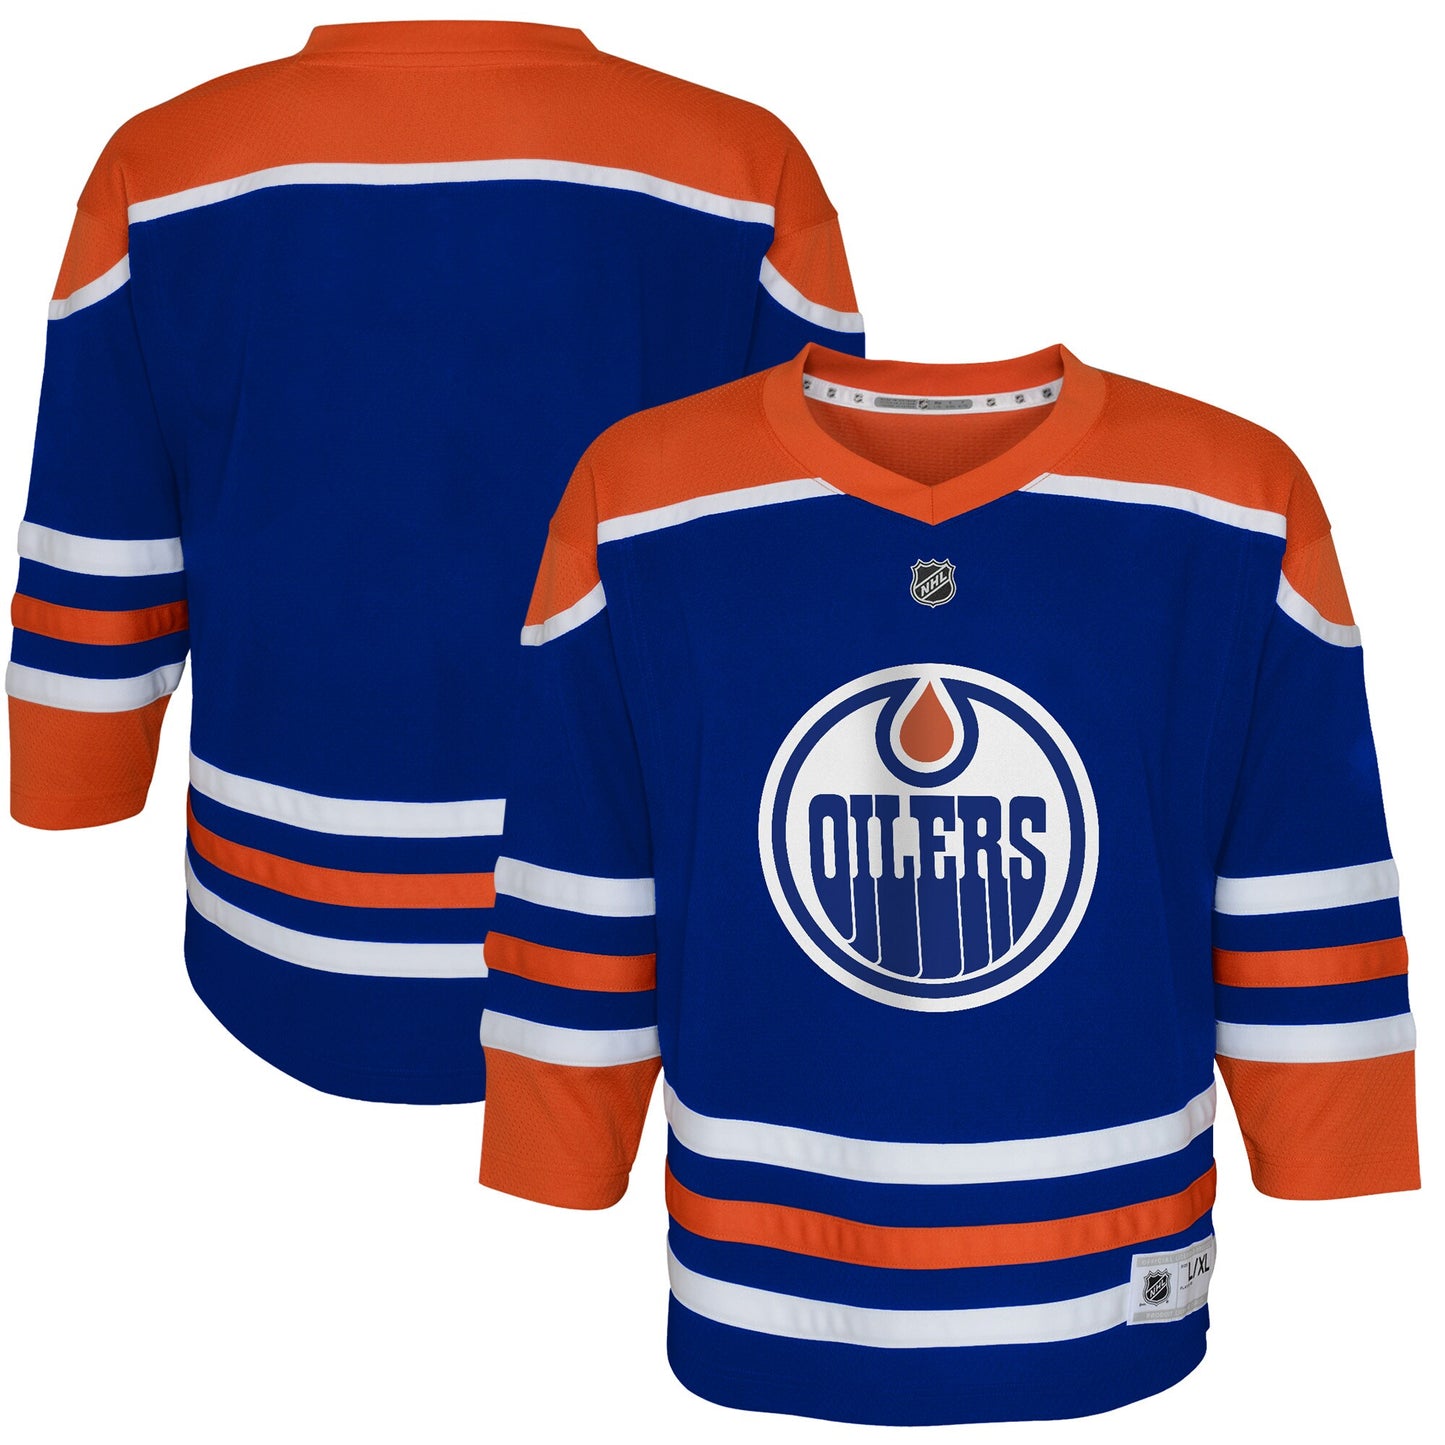 Edmonton Oilers Outerstuff Toddler Home Replica Jersey - Royal